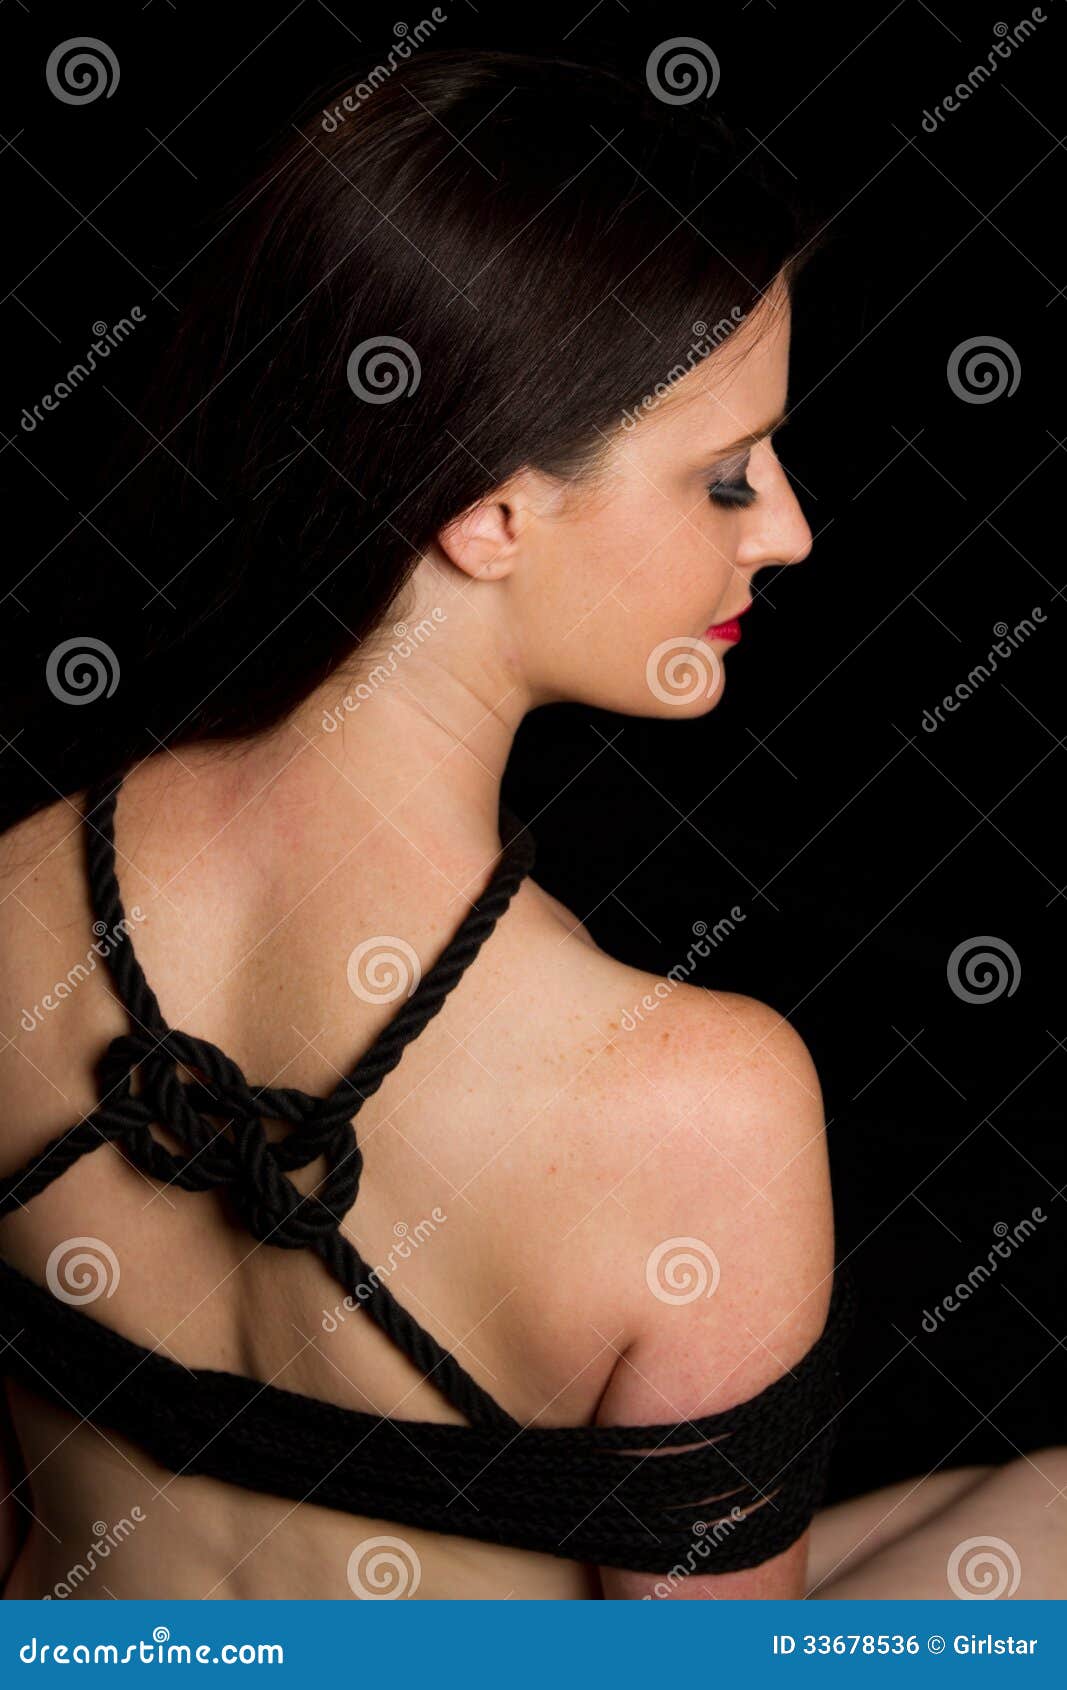 https://thumbs.dreamstime.com/z/girl-close-up-japanese-bondage-coin-knot-beautiful-woman-shows-off-her-double-as-part-her-rope-33678536.jpg